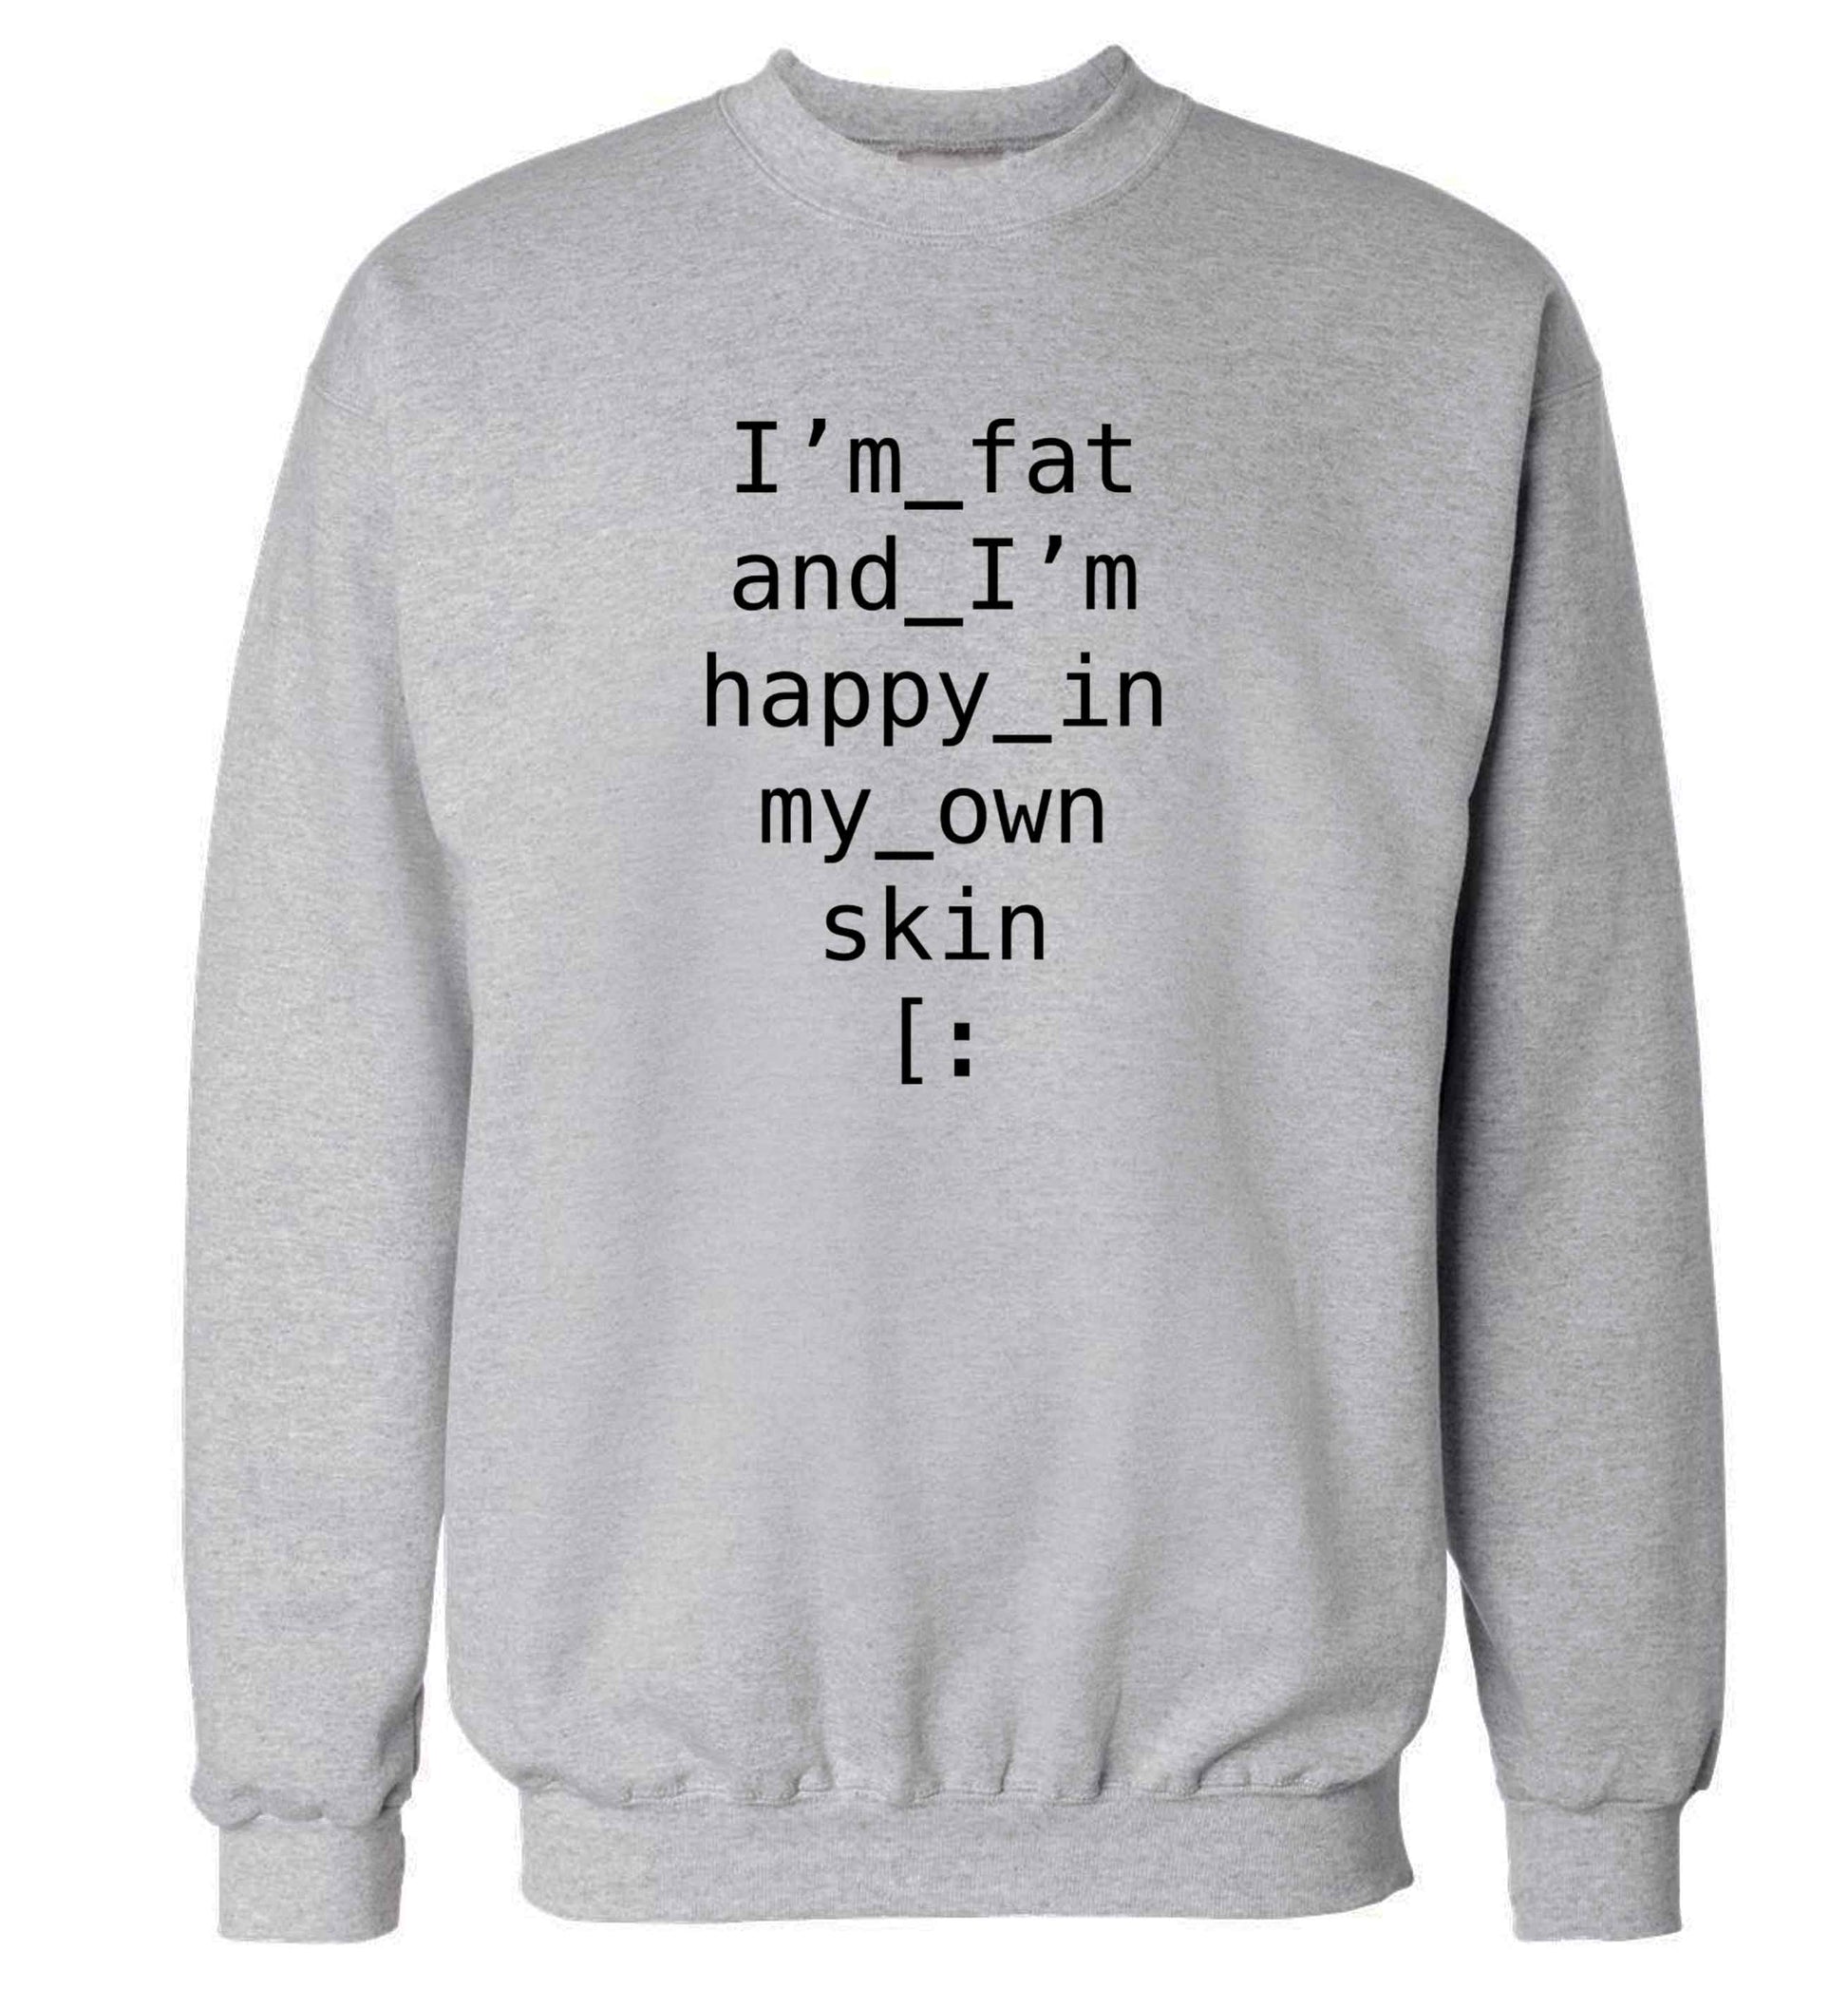 I'm fat and happy in my own skin adult's unisex grey sweater 2XL